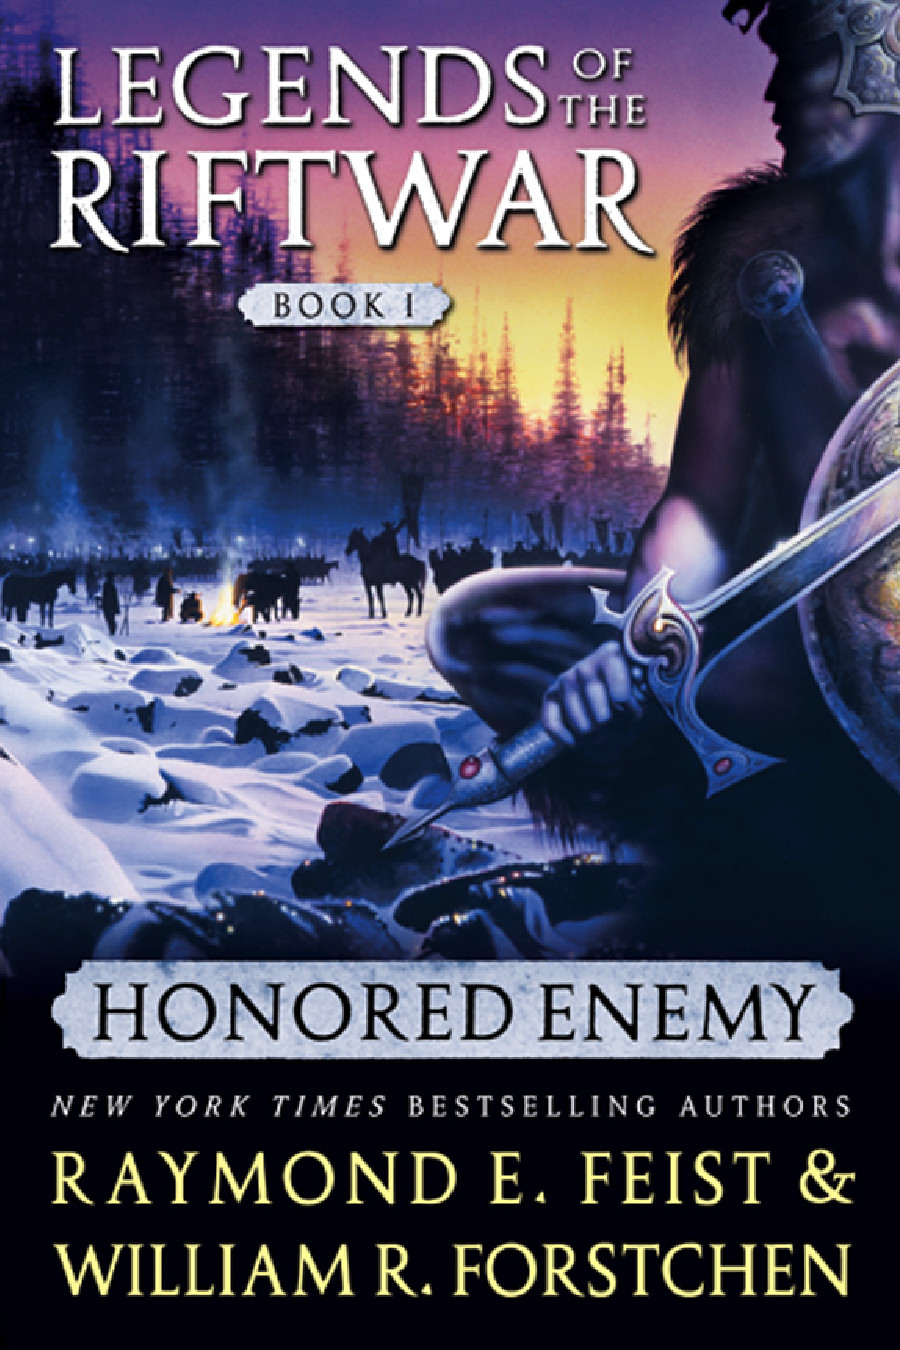 Honored Enemy by Raymond E. Feist